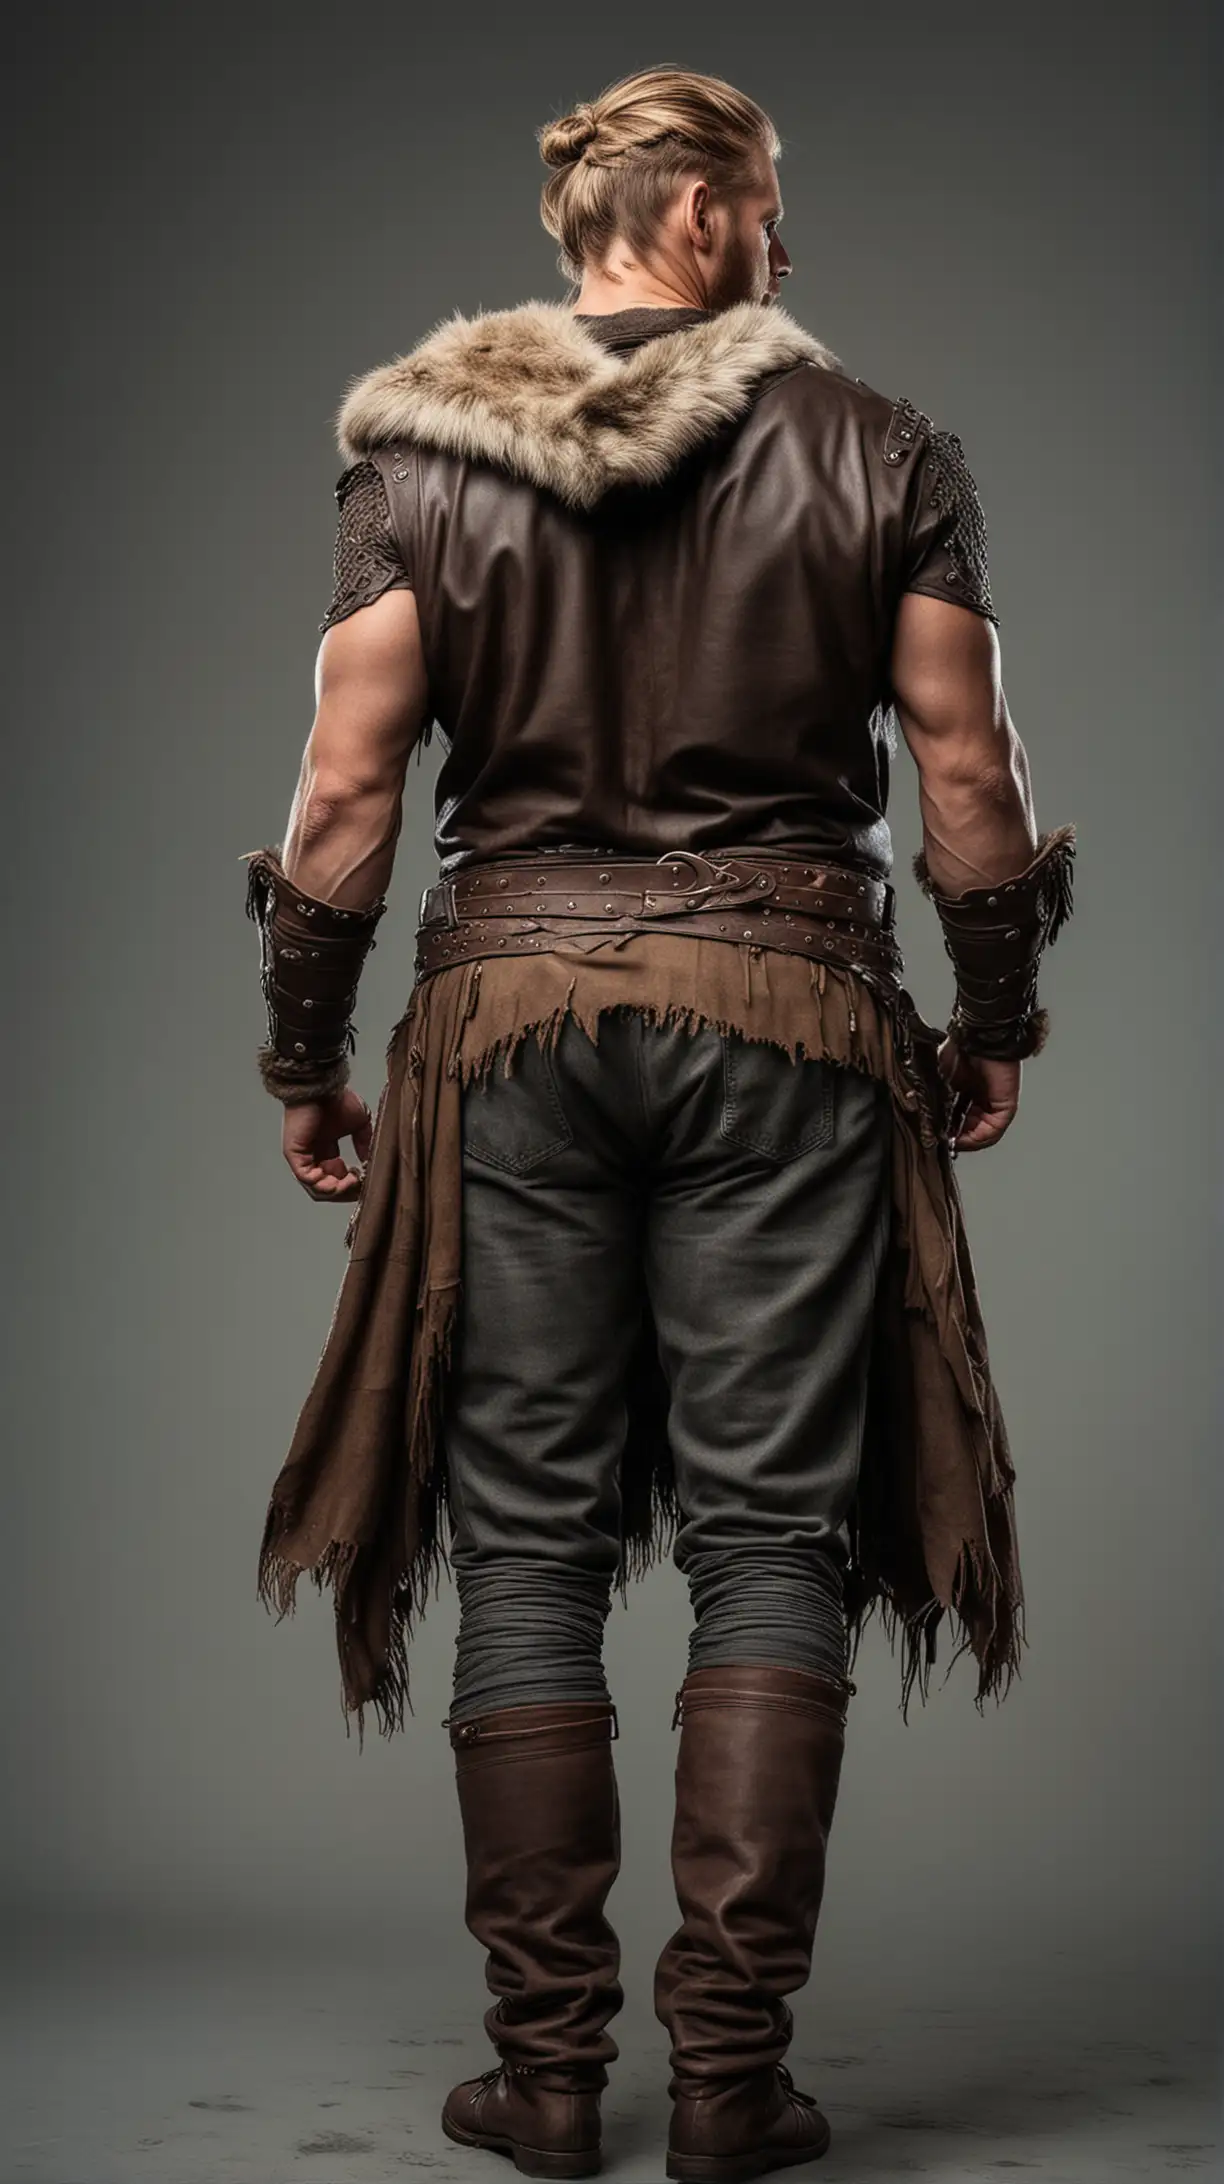 male muscular viking warrior, back view, full body, showing no face=, hair tied high, wearing pants and viking gear, leather sleeves, fur shawl
